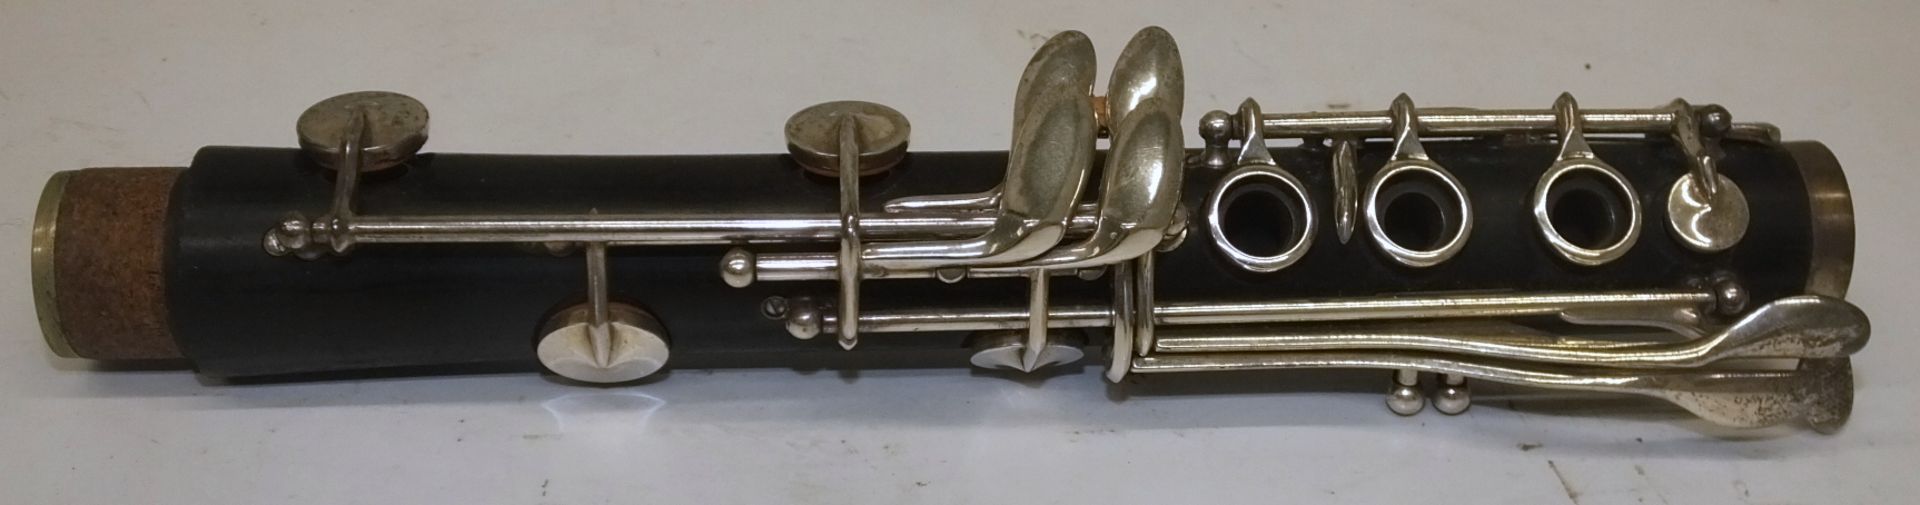 Boosey & Hawkes Imperial 926 Clarinet - Serial Number - 504212 (as spares) - Image 5 of 15